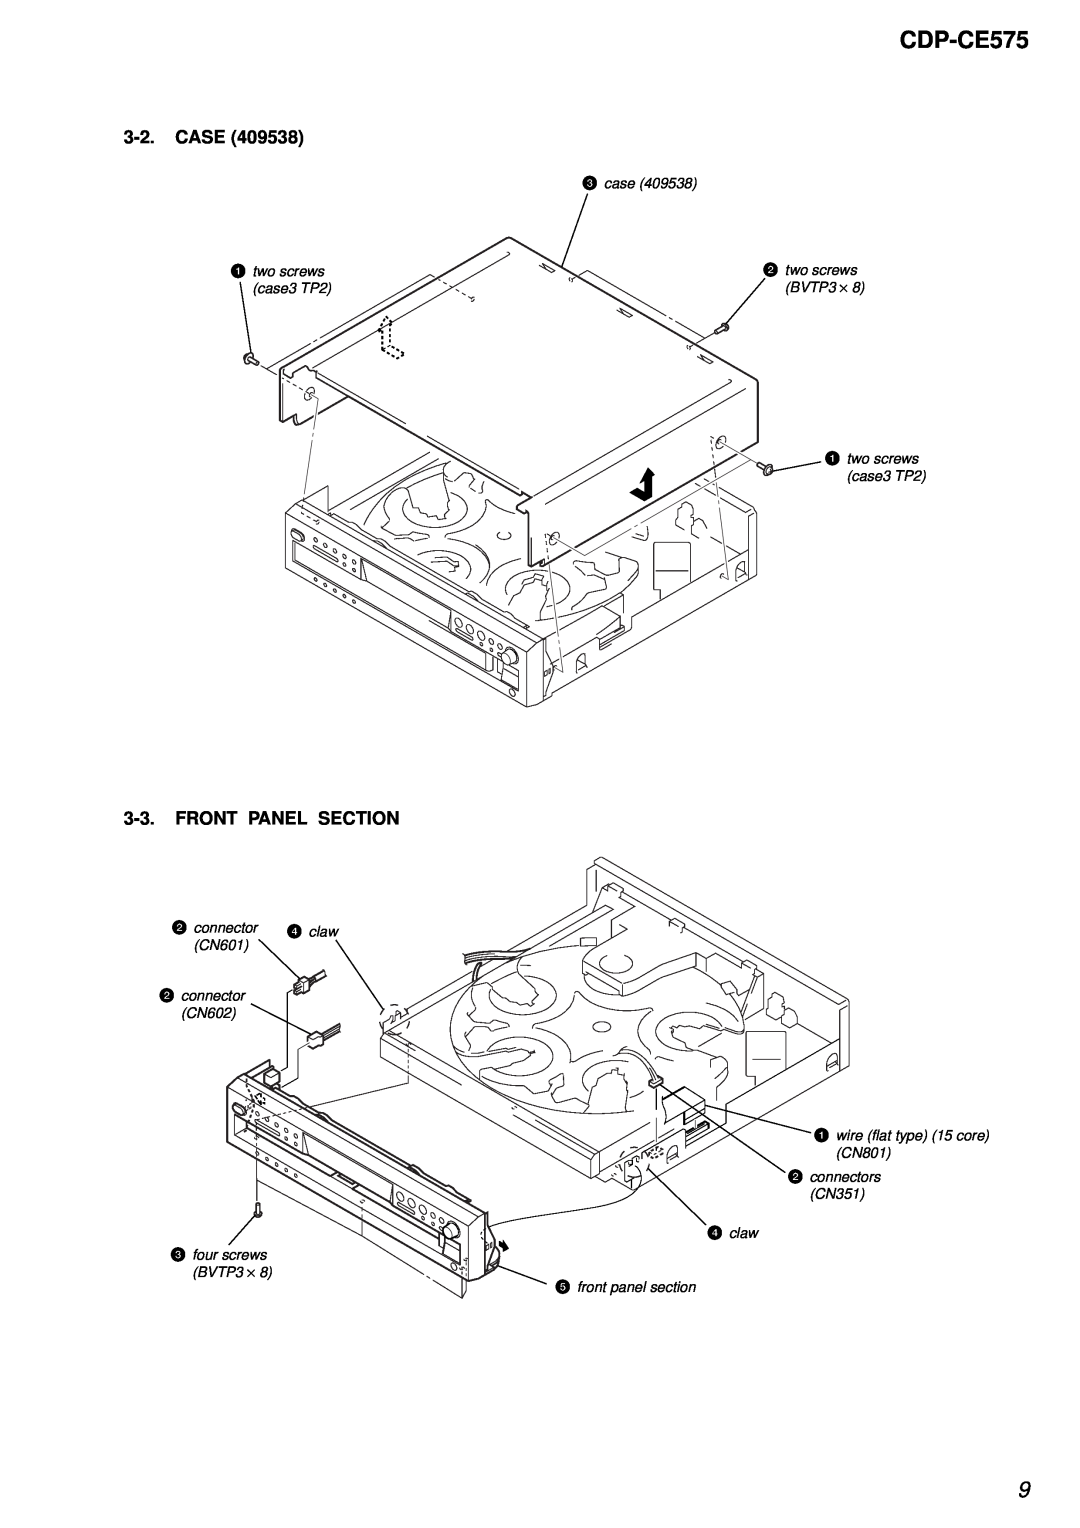 Sony CDP-CE575 service manual Case, Front Panel Section 